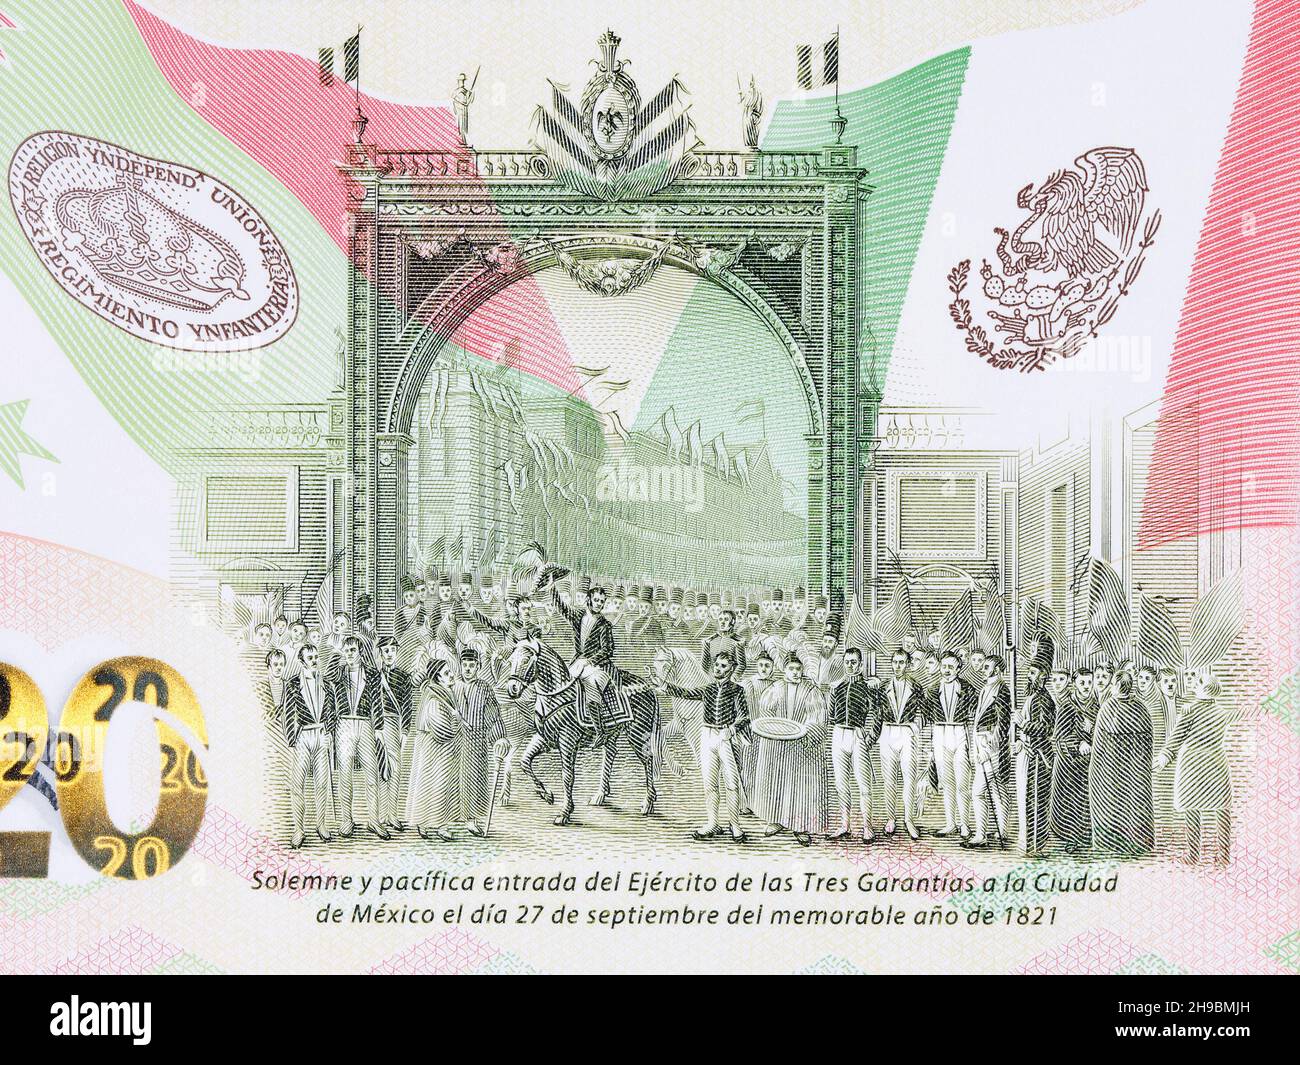 Arrival to Mexico City of the Army of the Triple Guarantee on 27 September 1821 from money Stock Photo